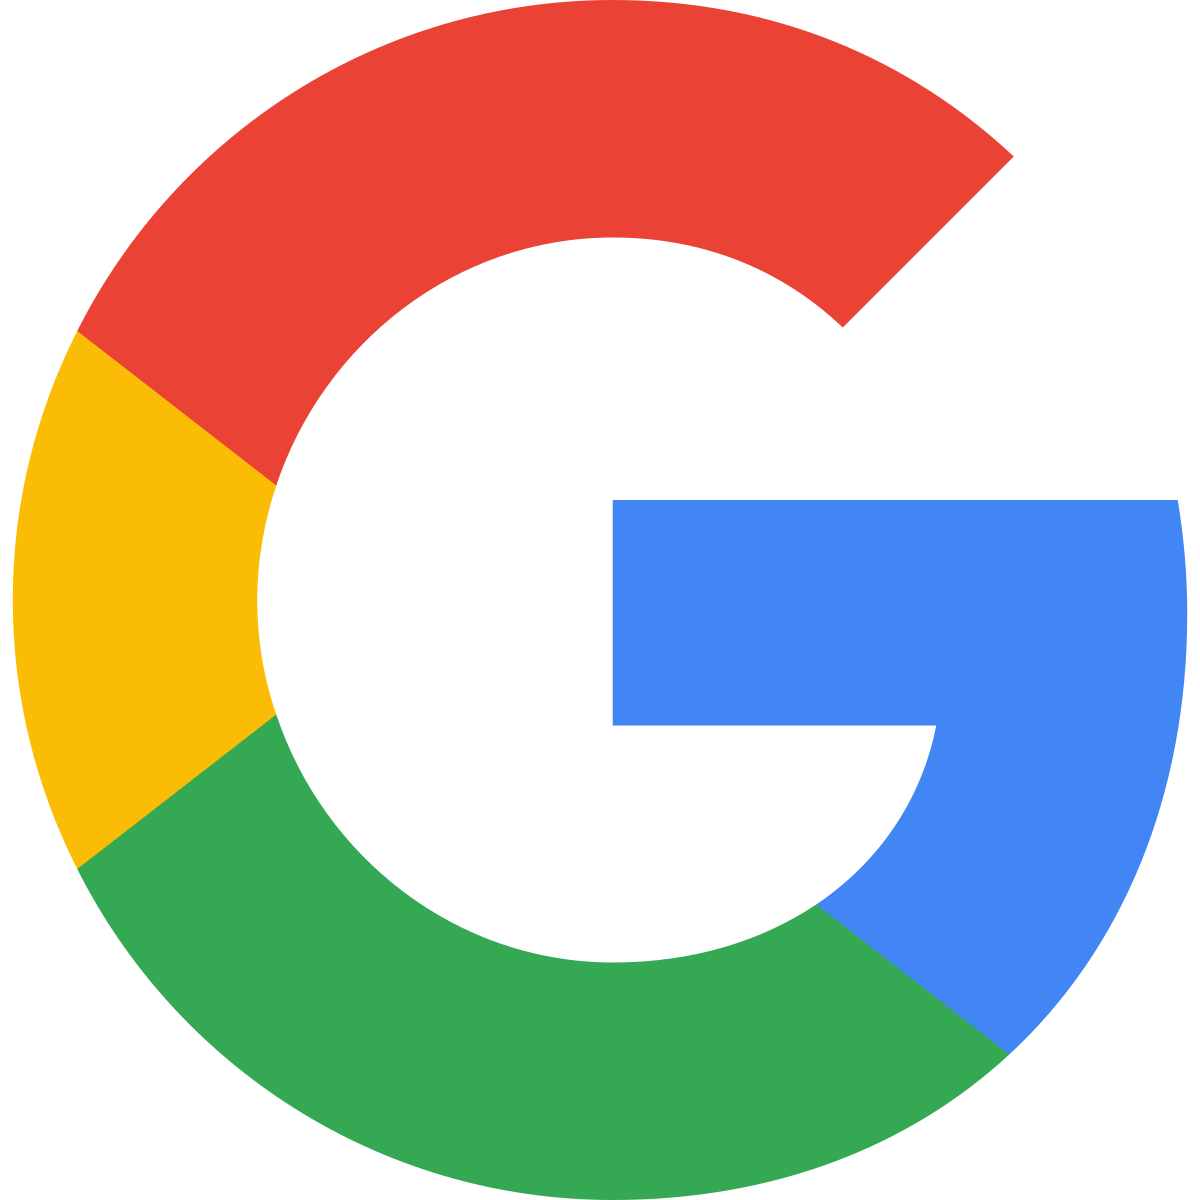 Google logo: a capital letter 'G' with color blocking in red, yellow, green, and blue.